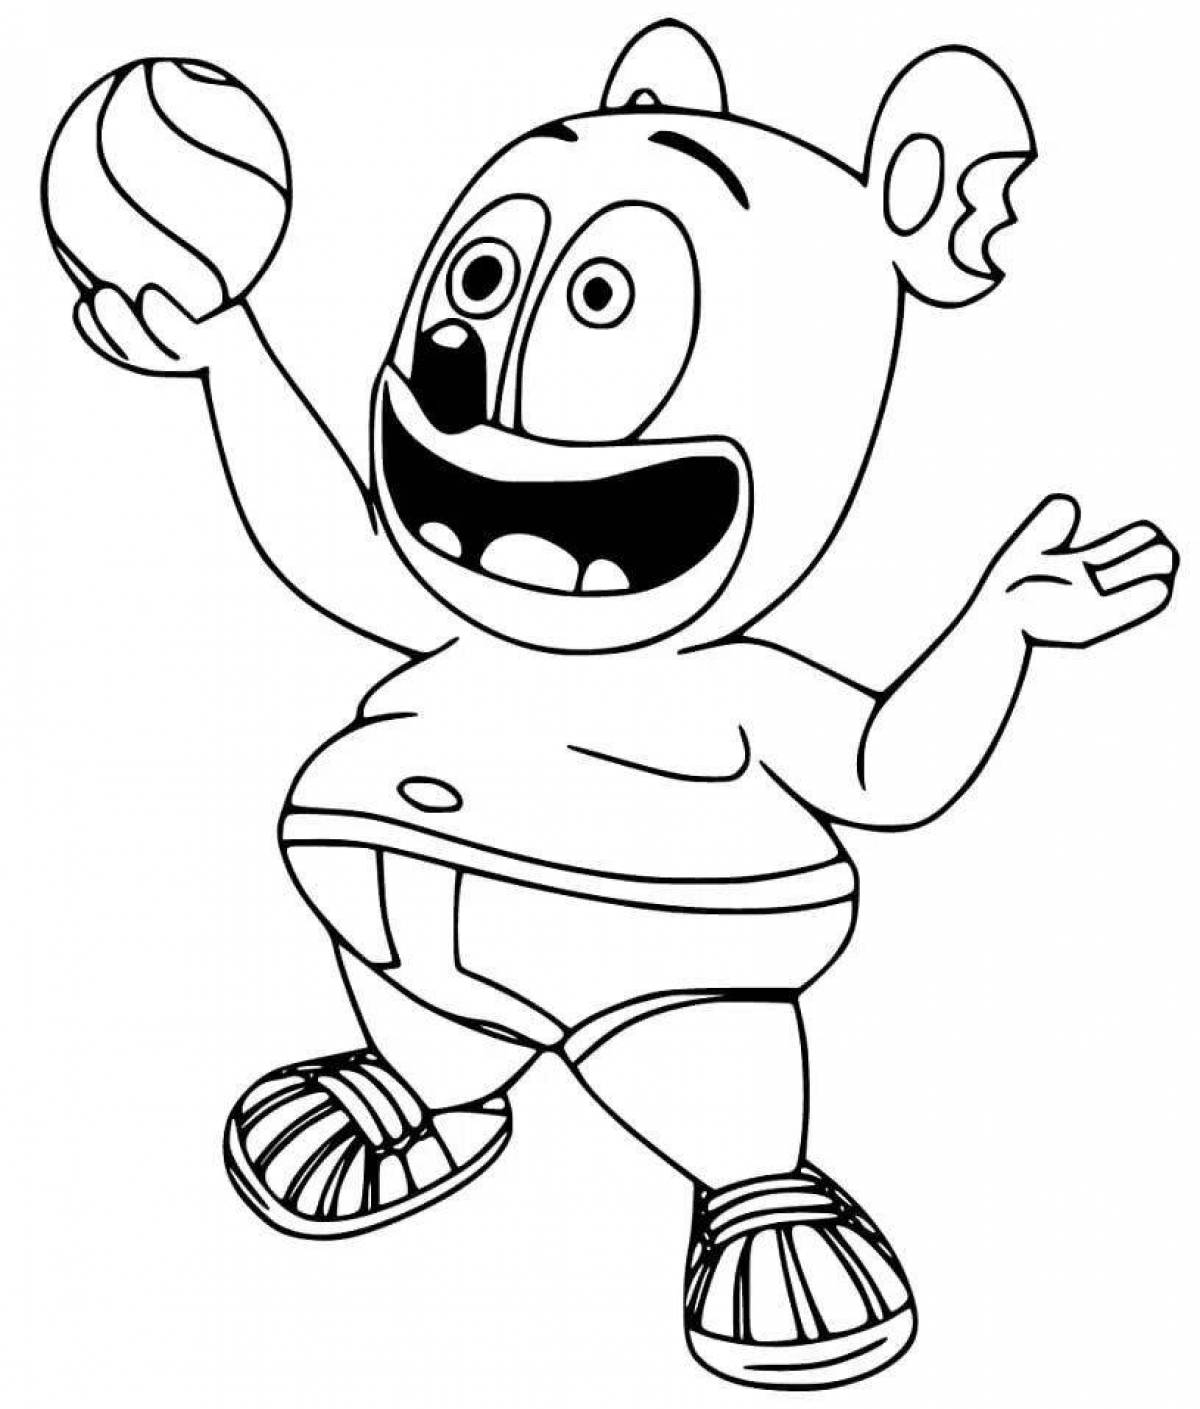 Animated humber coloring page